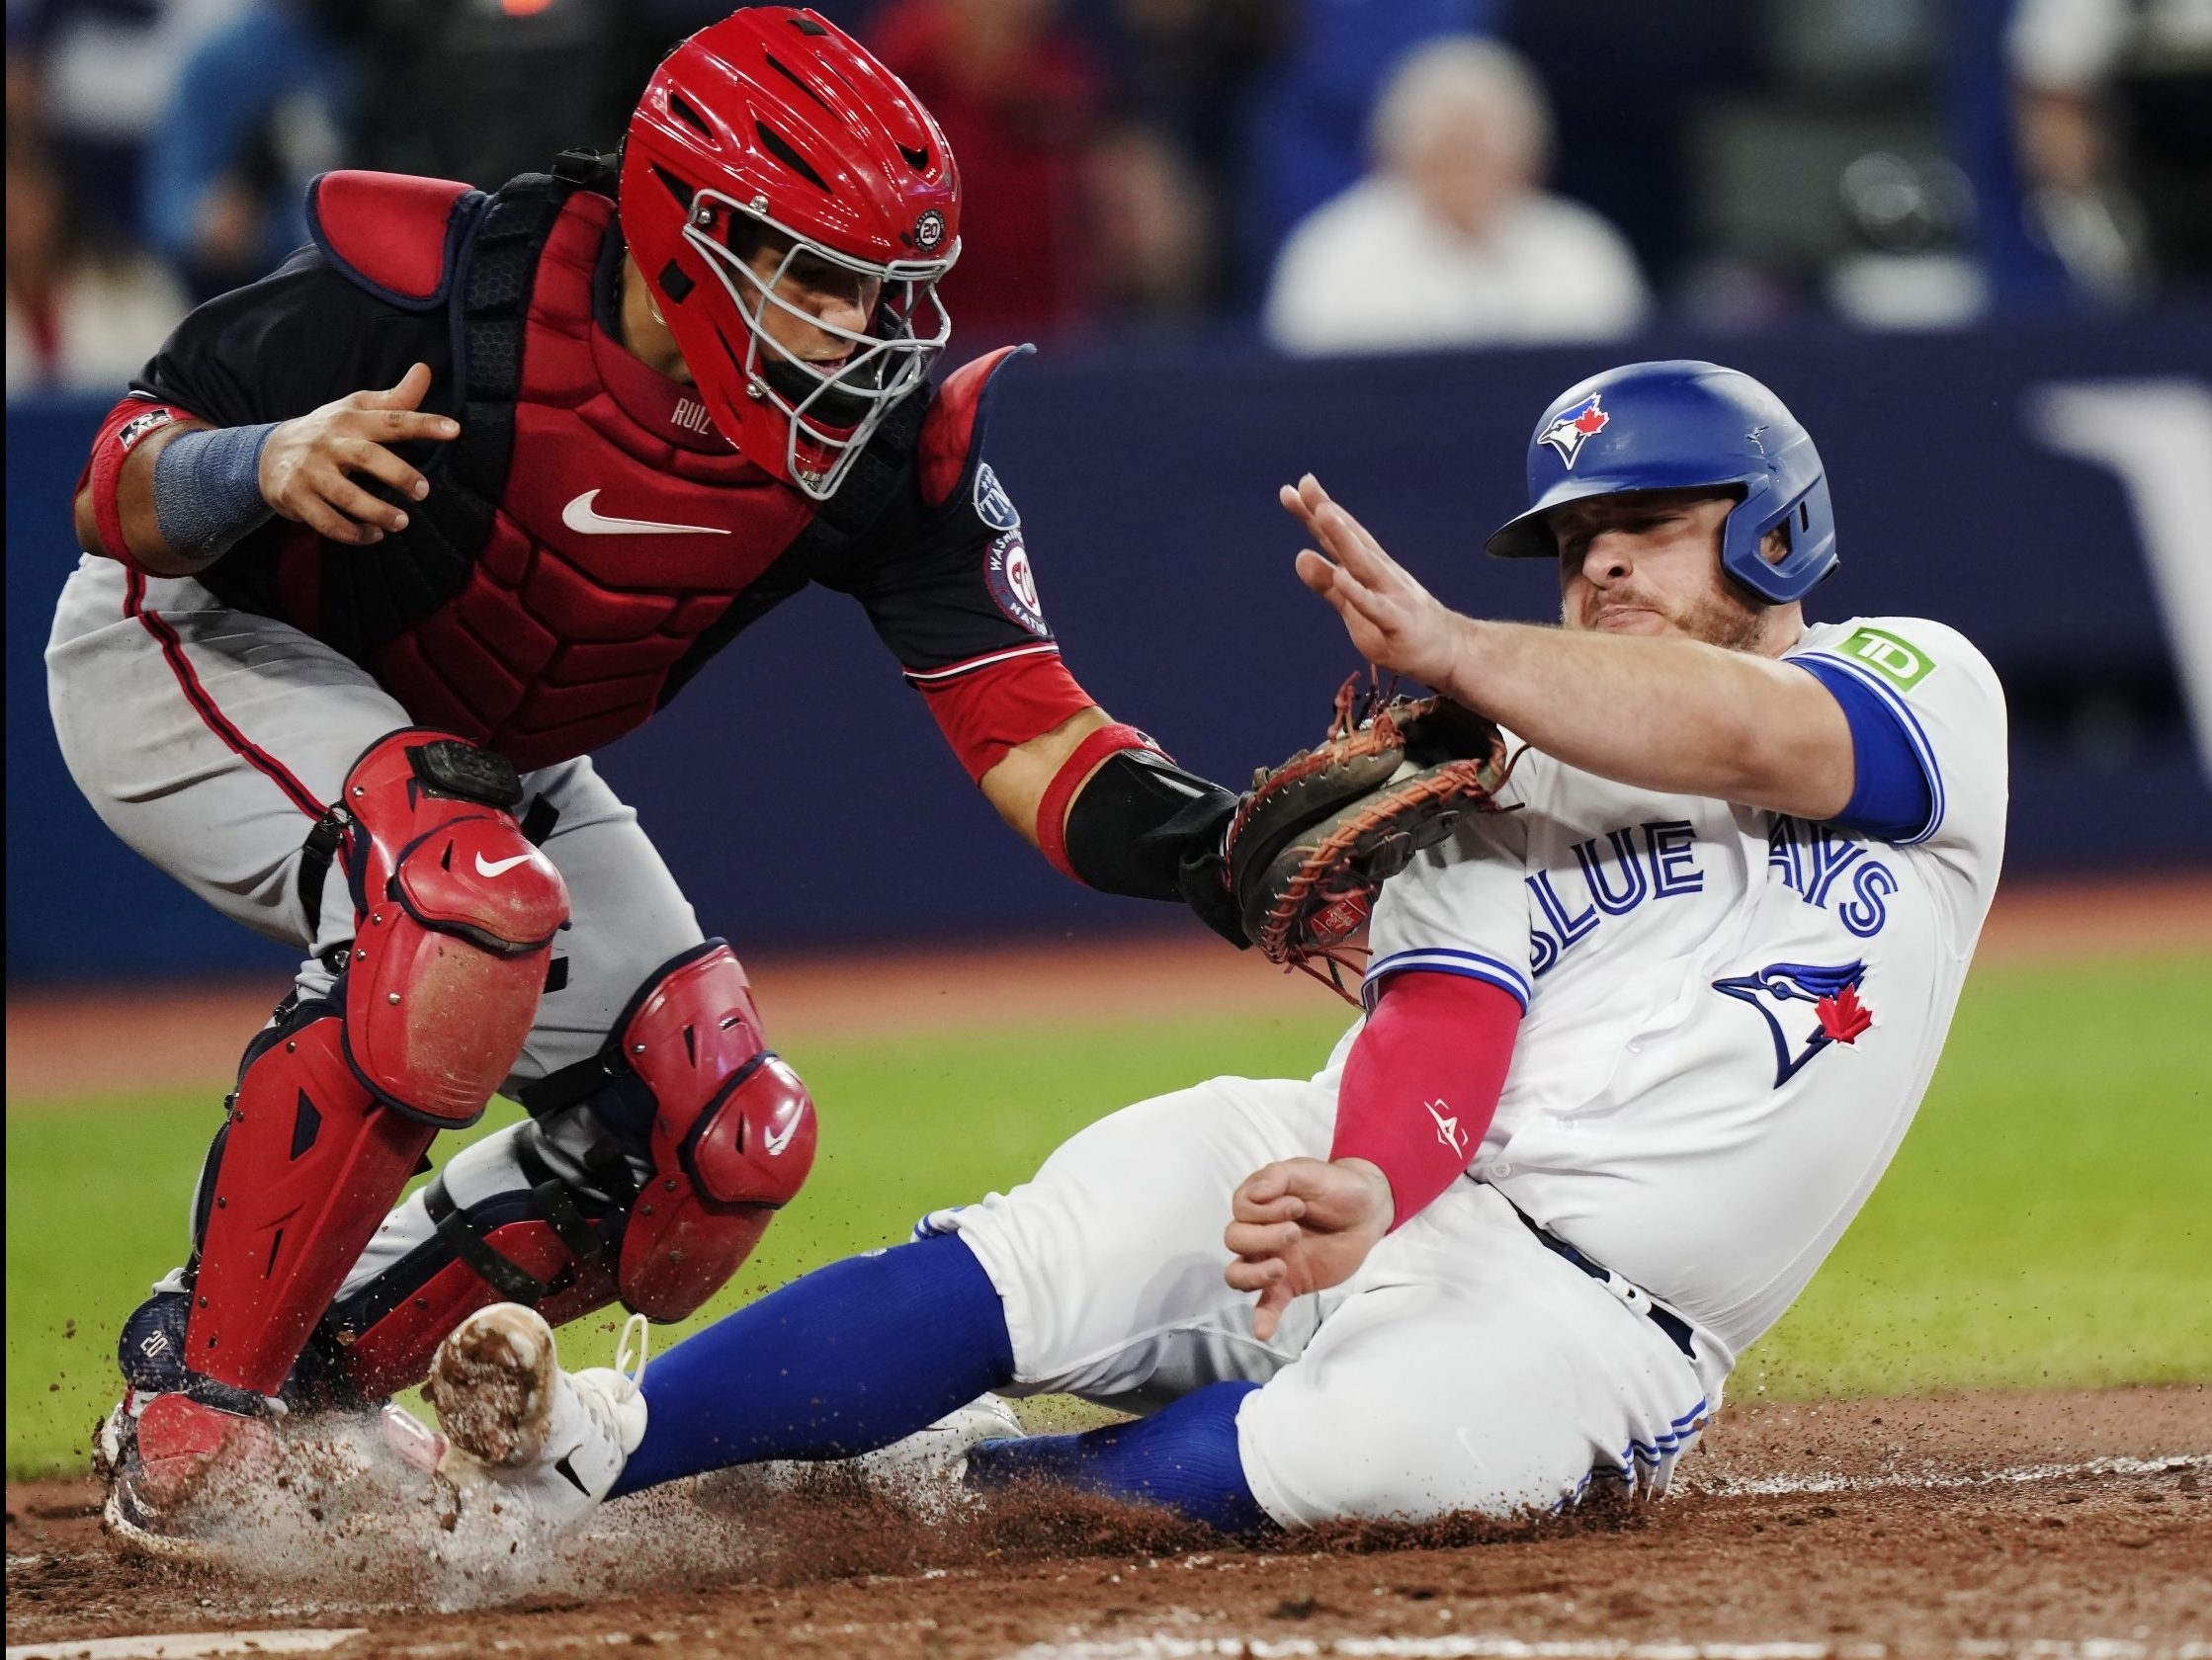 Danny Jansen injury update: Blue Jays catcher on IL with fractured finger,  out for rest of regular season 